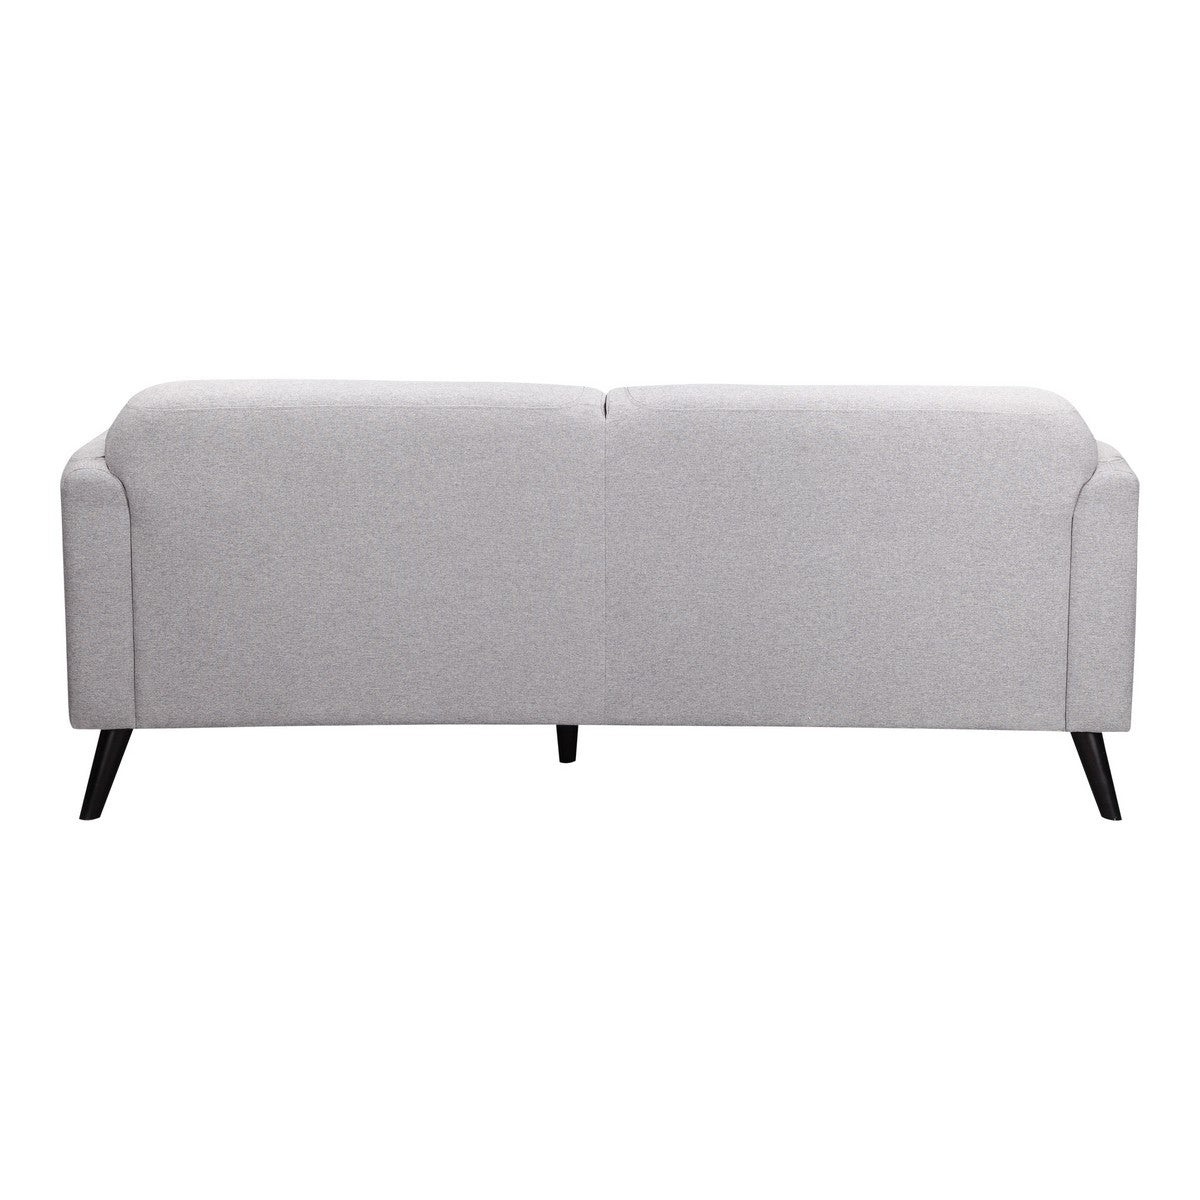 Moe's Home Collection Peppy Sofa Grey - FW-1006-15